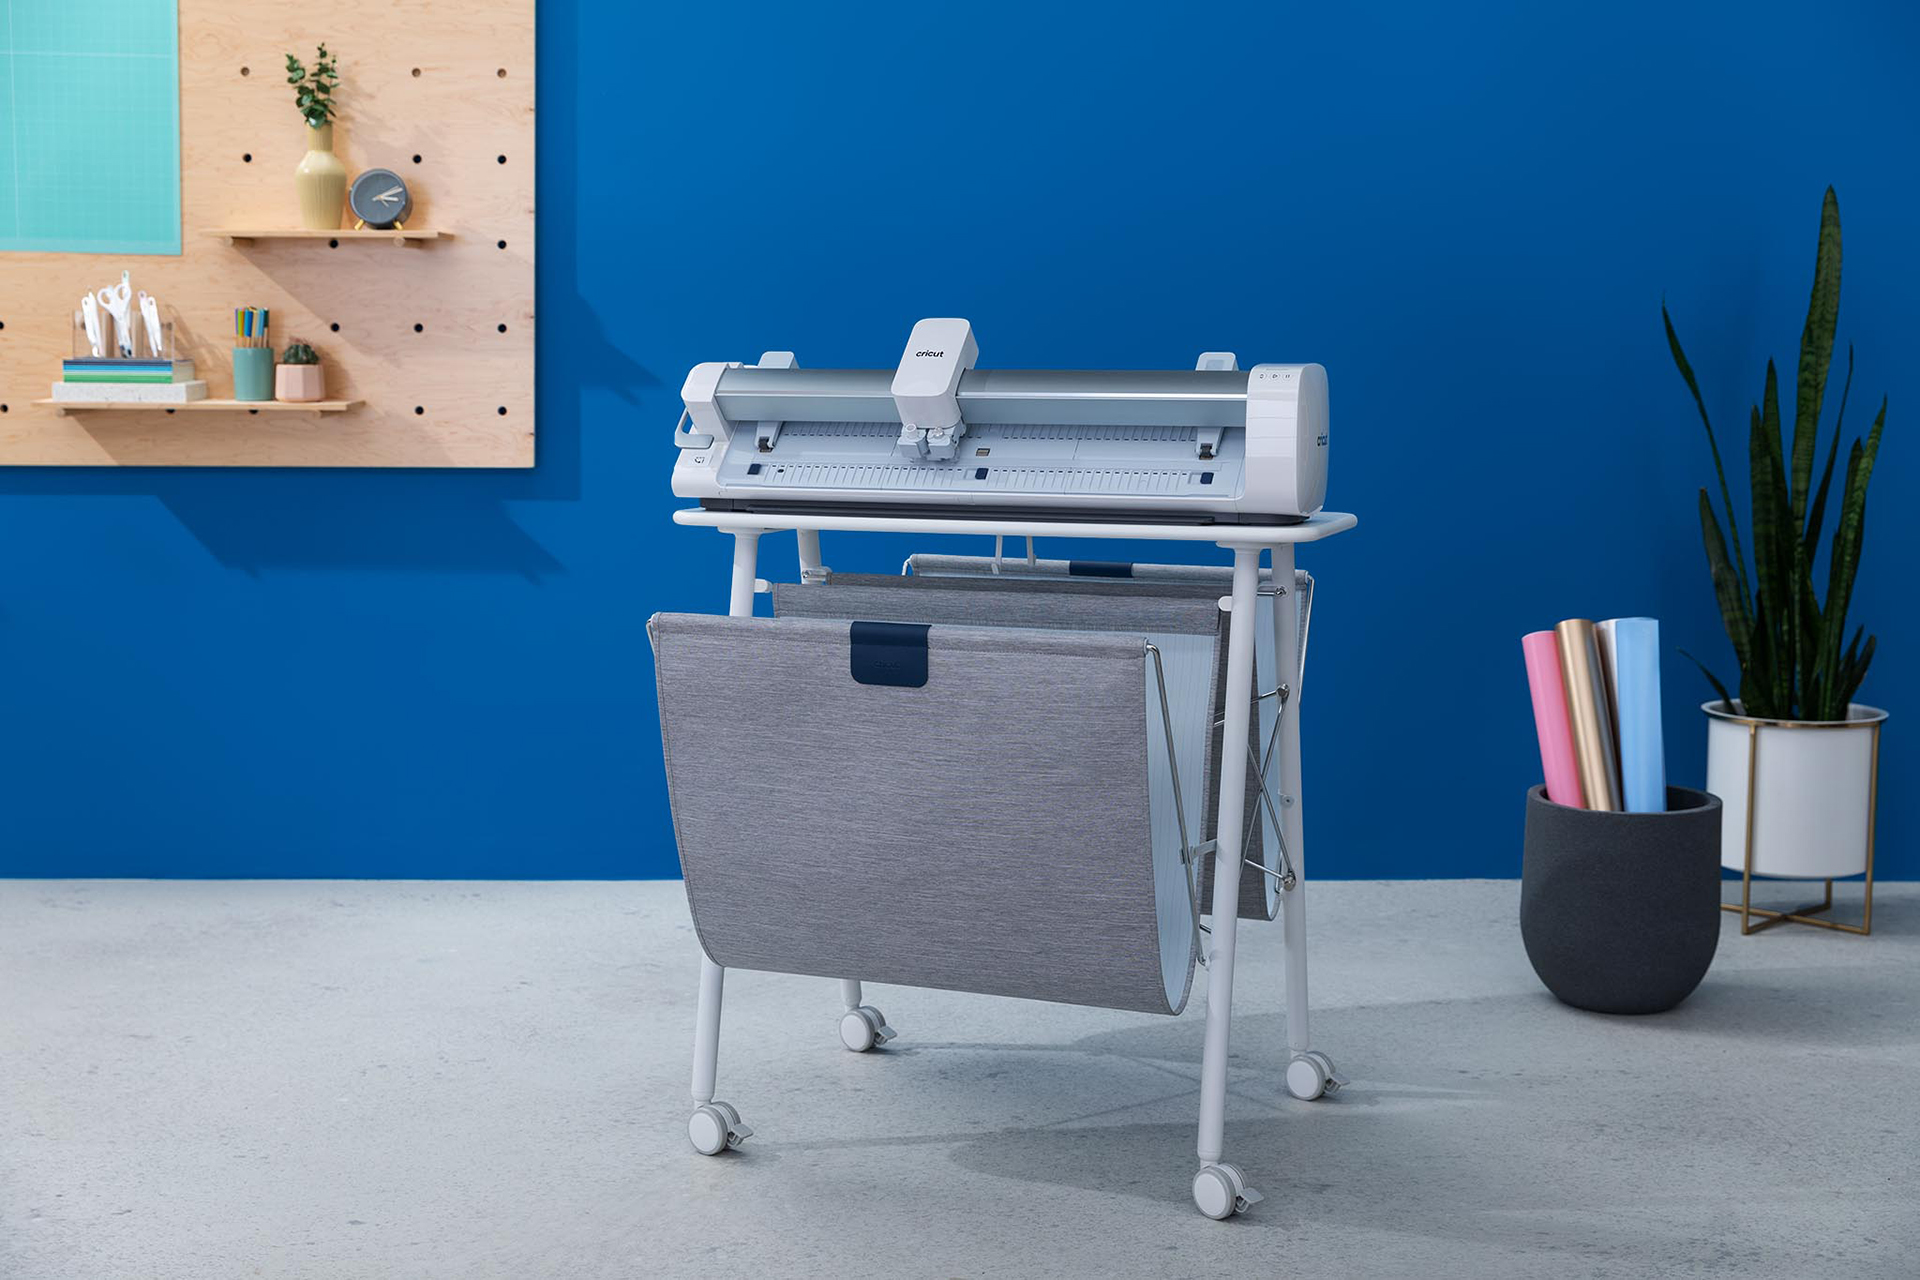 Introducing Cricut Venture™, the largest and fastest cutting machine on the Cricut® platform